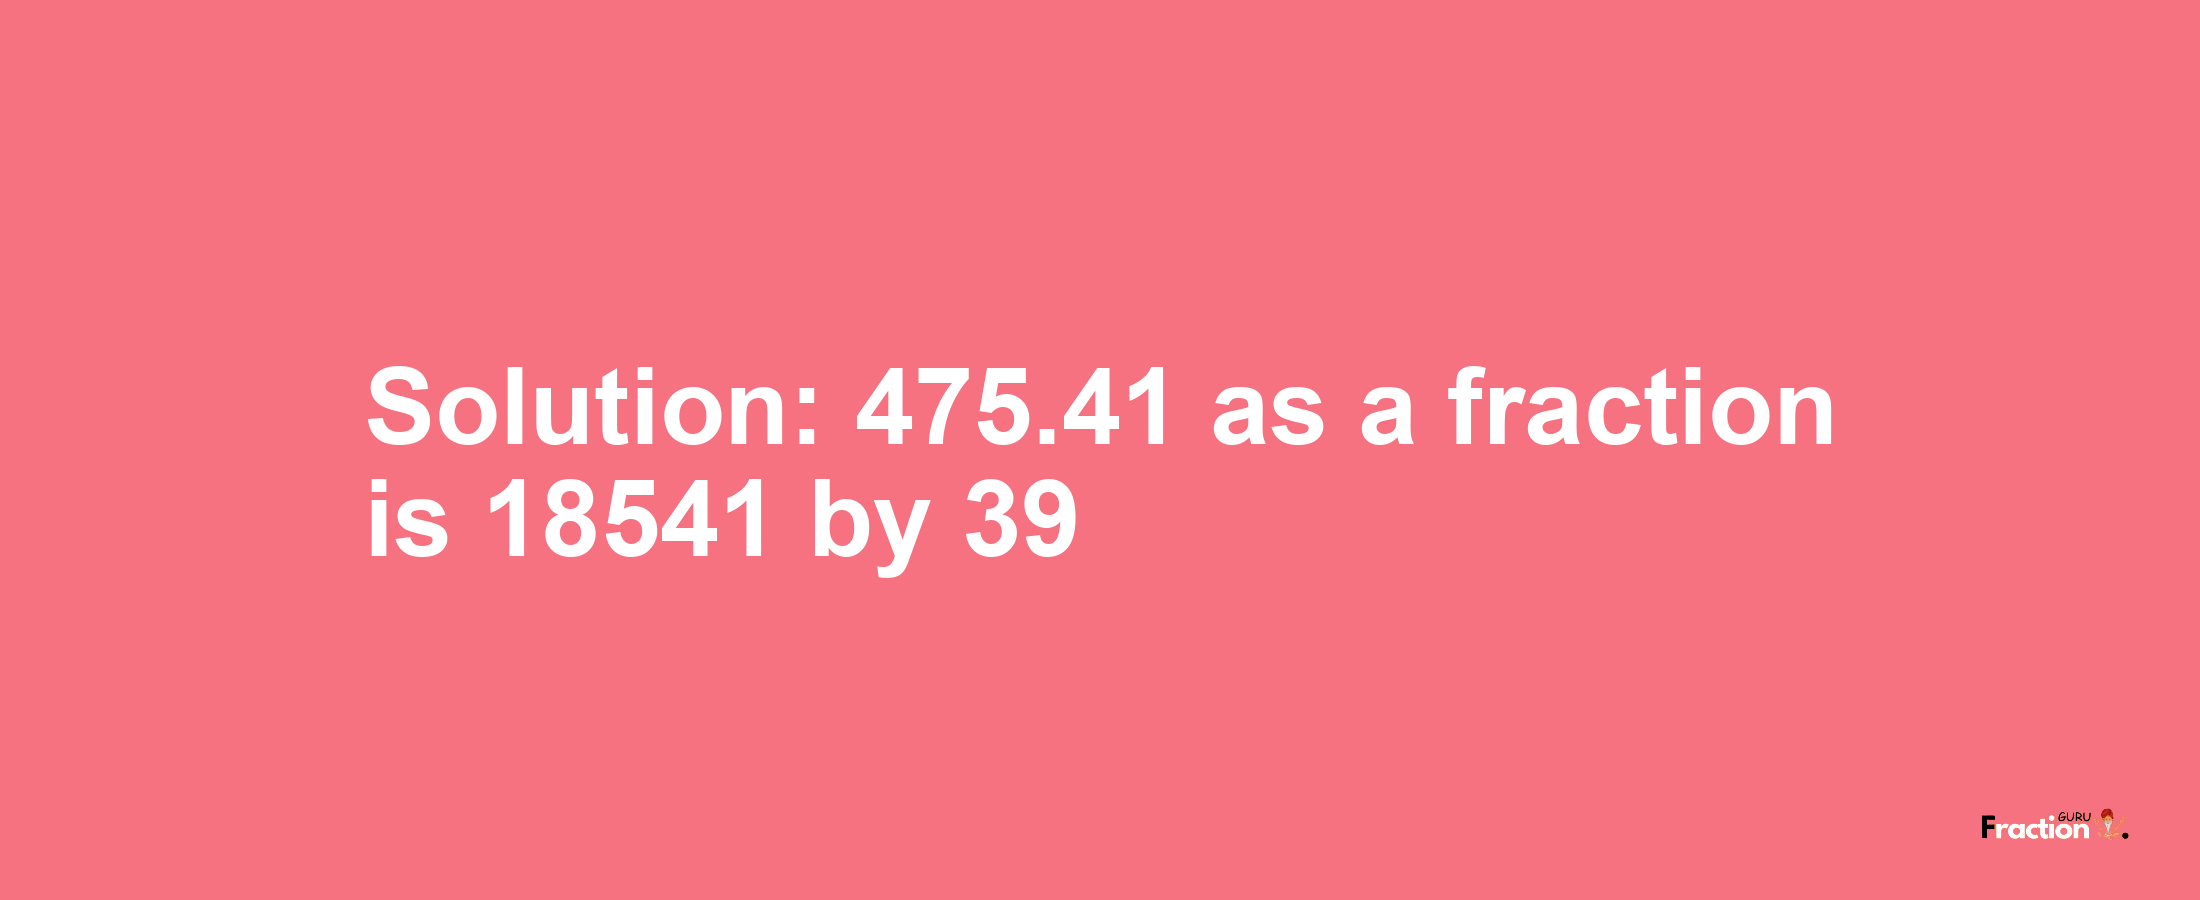 Solution:475.41 as a fraction is 18541/39